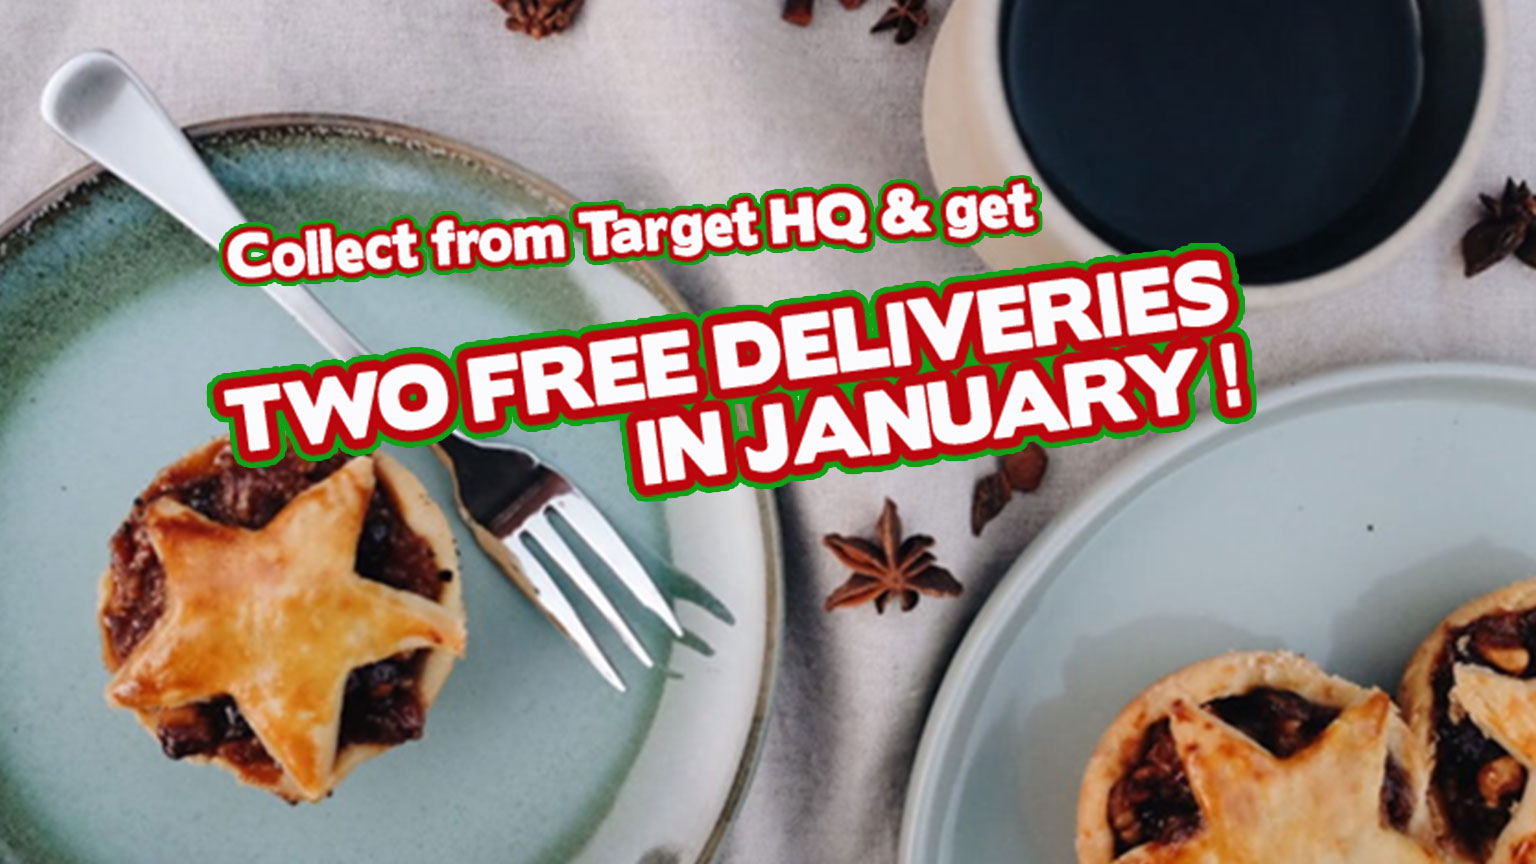 Free Deliveries at Target when you collect